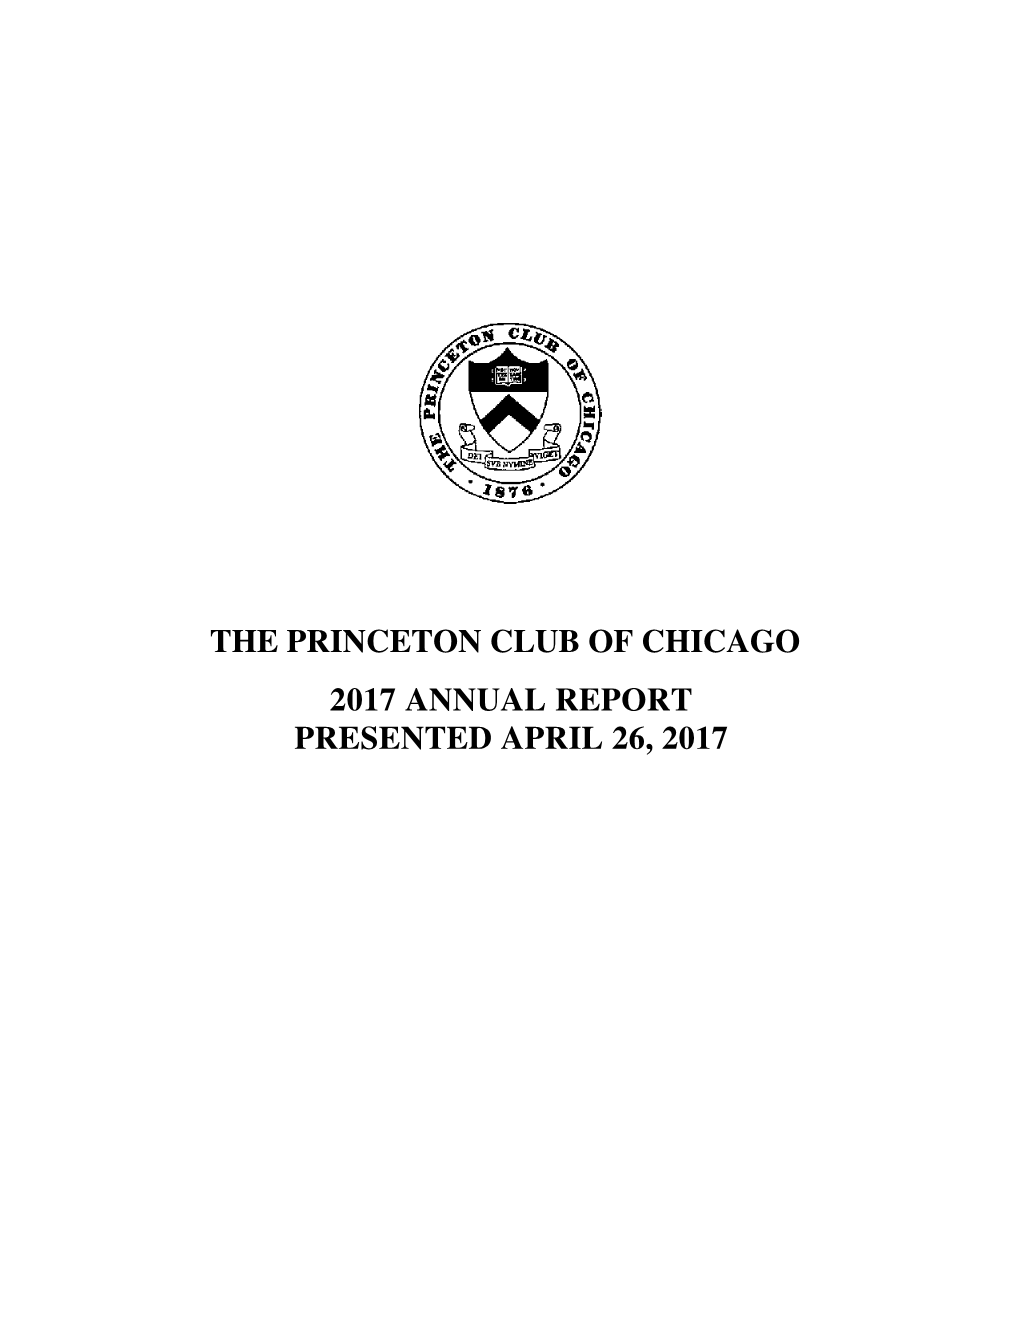 THE PRINCETON CLUB of CHICAGO 2017 ANNUAL REPORT PRESENTED APRIL 26, 2017 PRINCETON CLUB of CHICAGO Founded 1876 MISSION